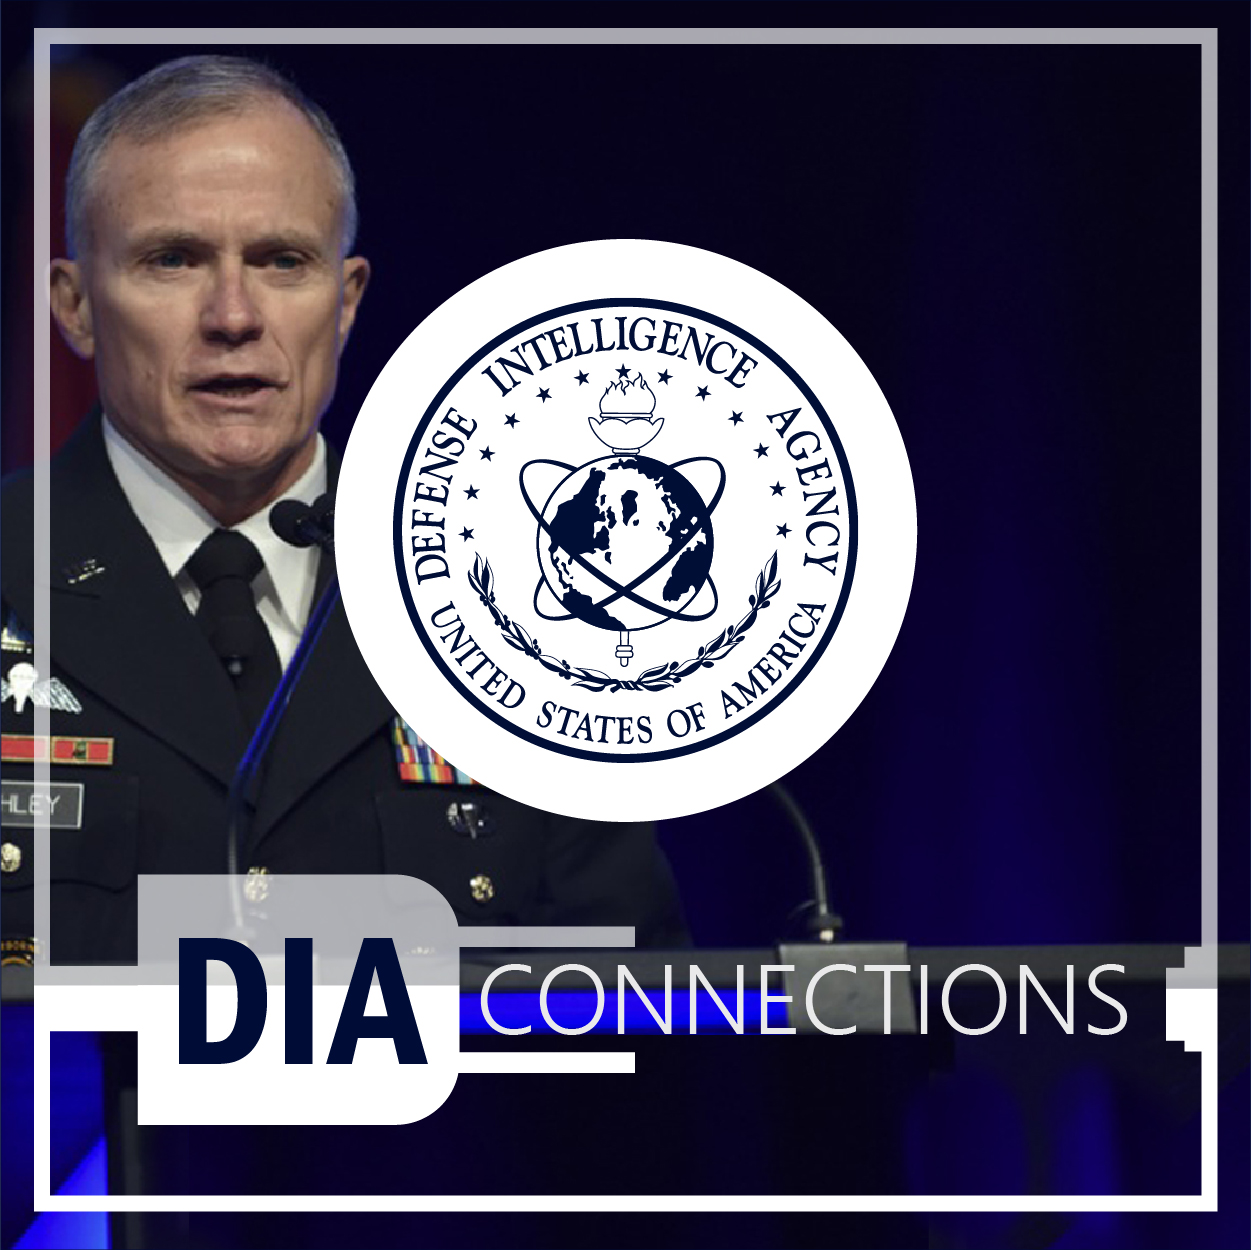 Image of a uniformed member with D-I-A Seal and title. D-I-A Connections.